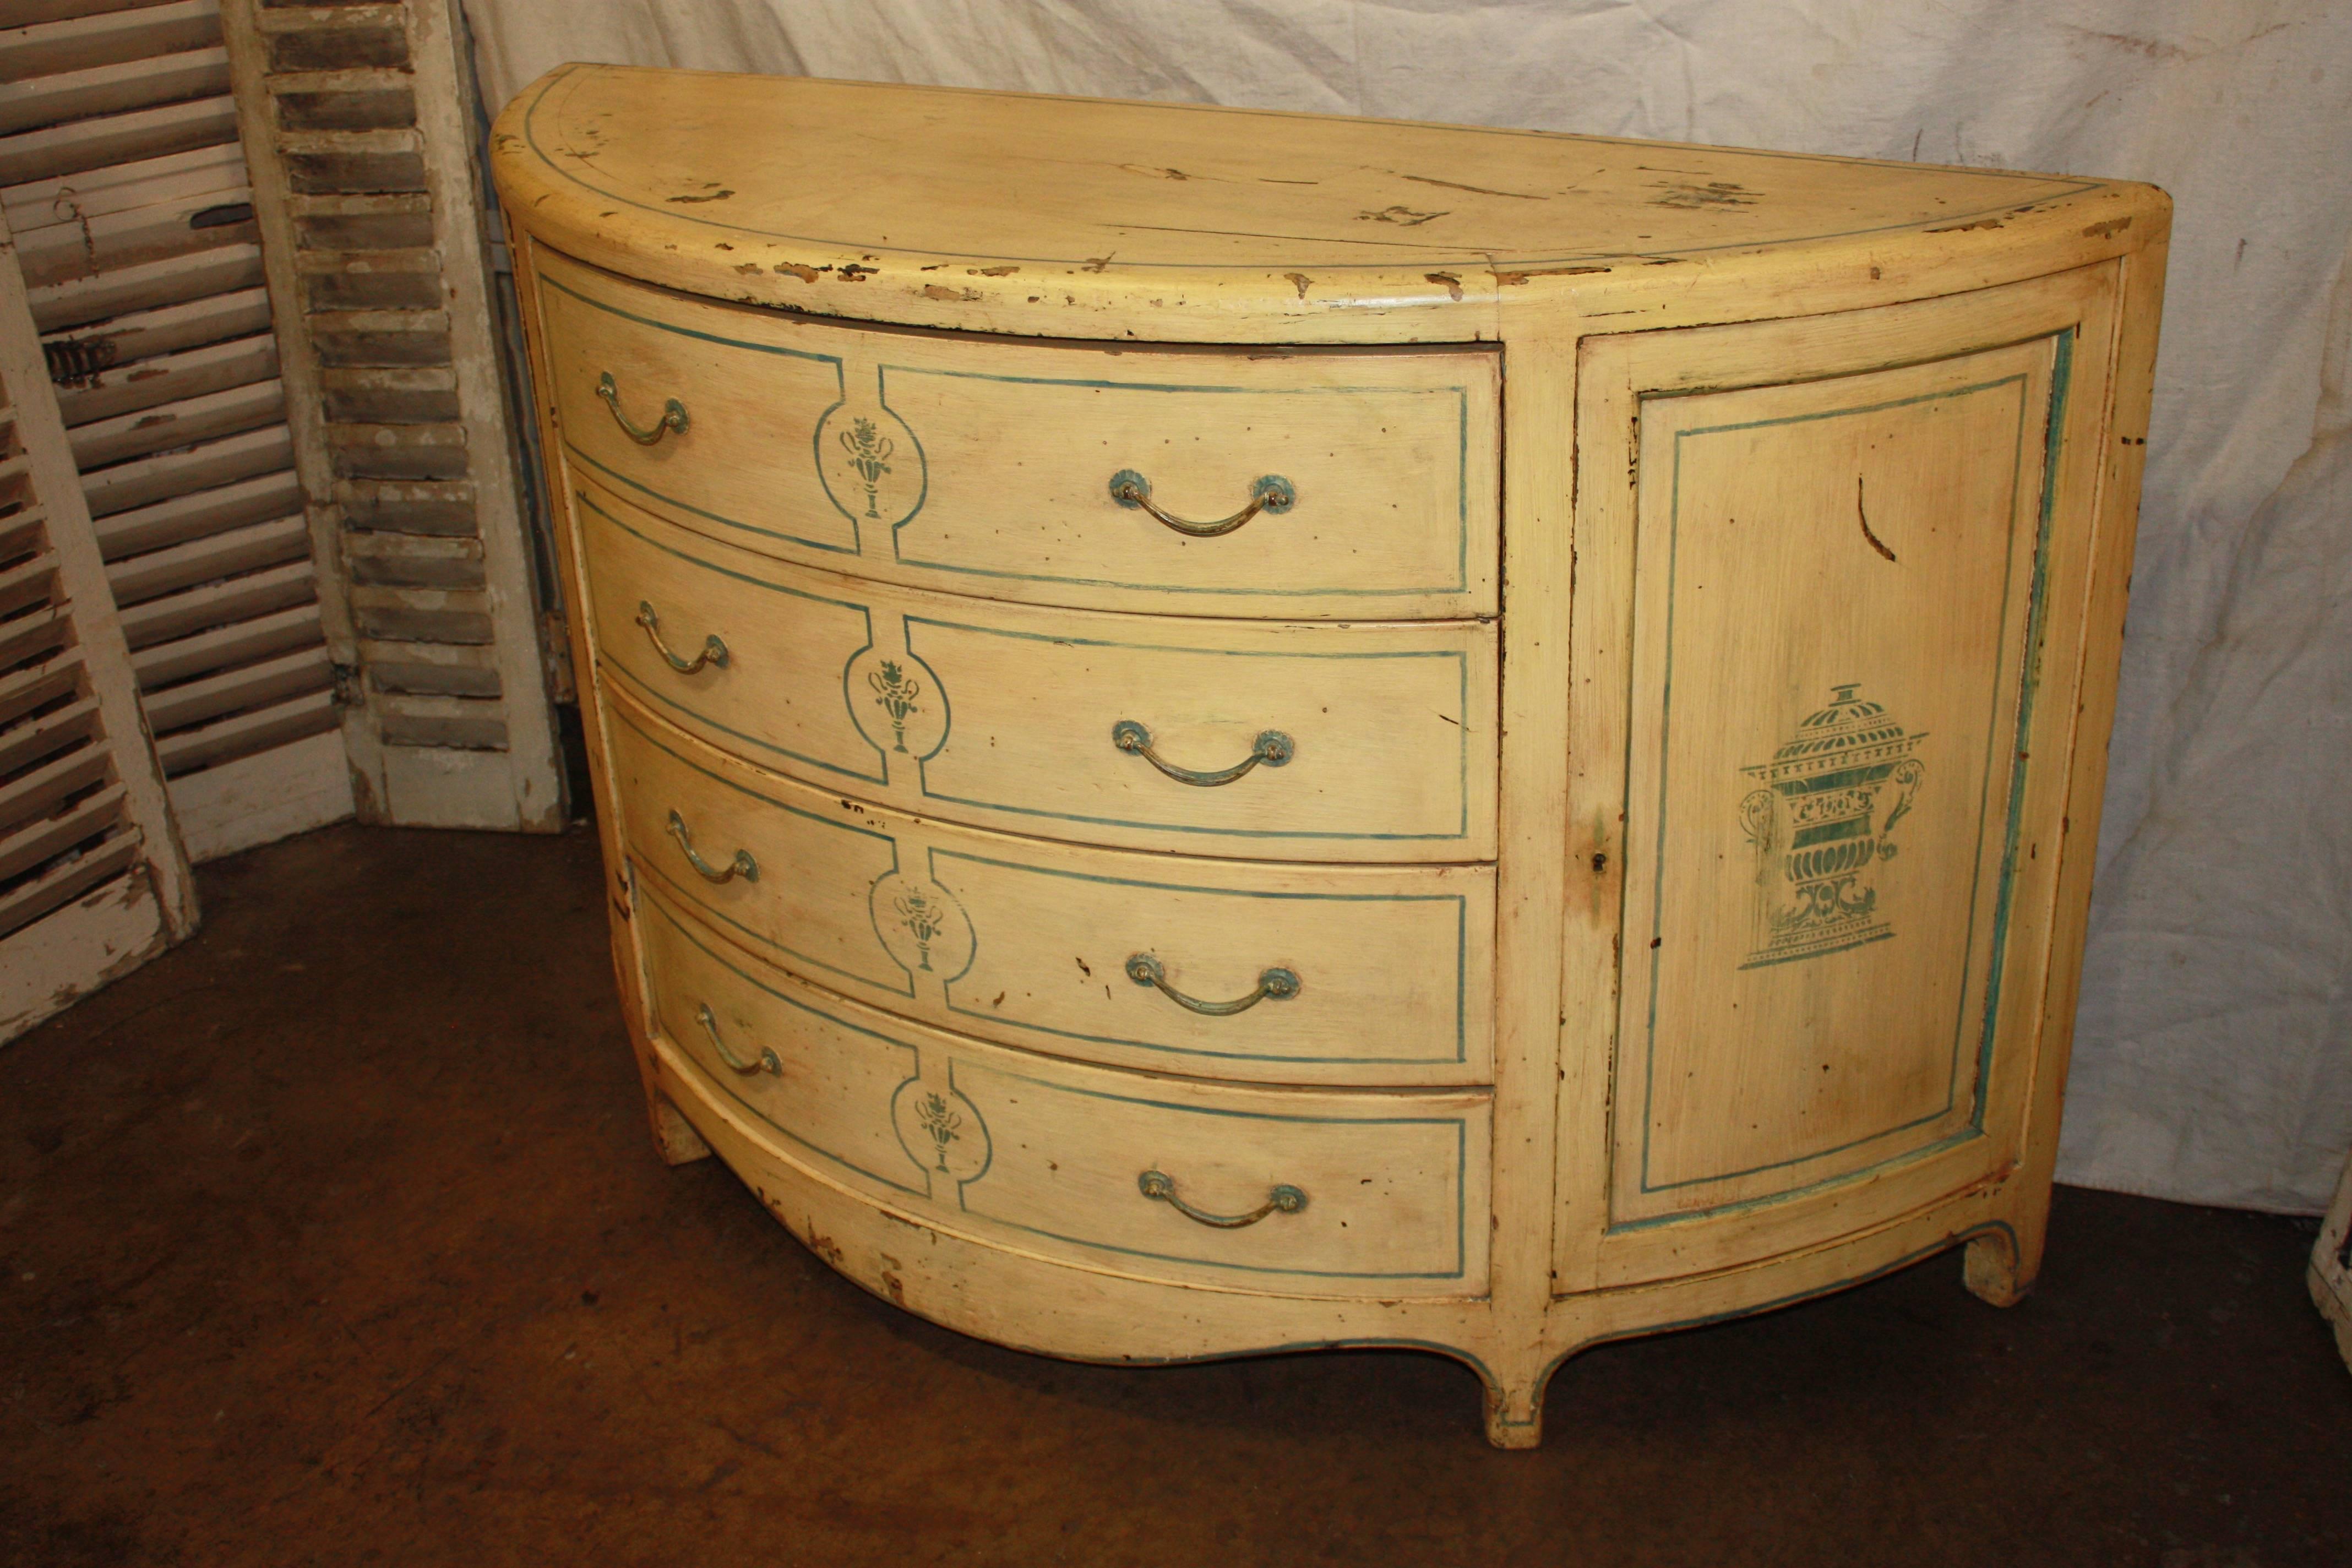 Charming early 20th century half-moon chest.